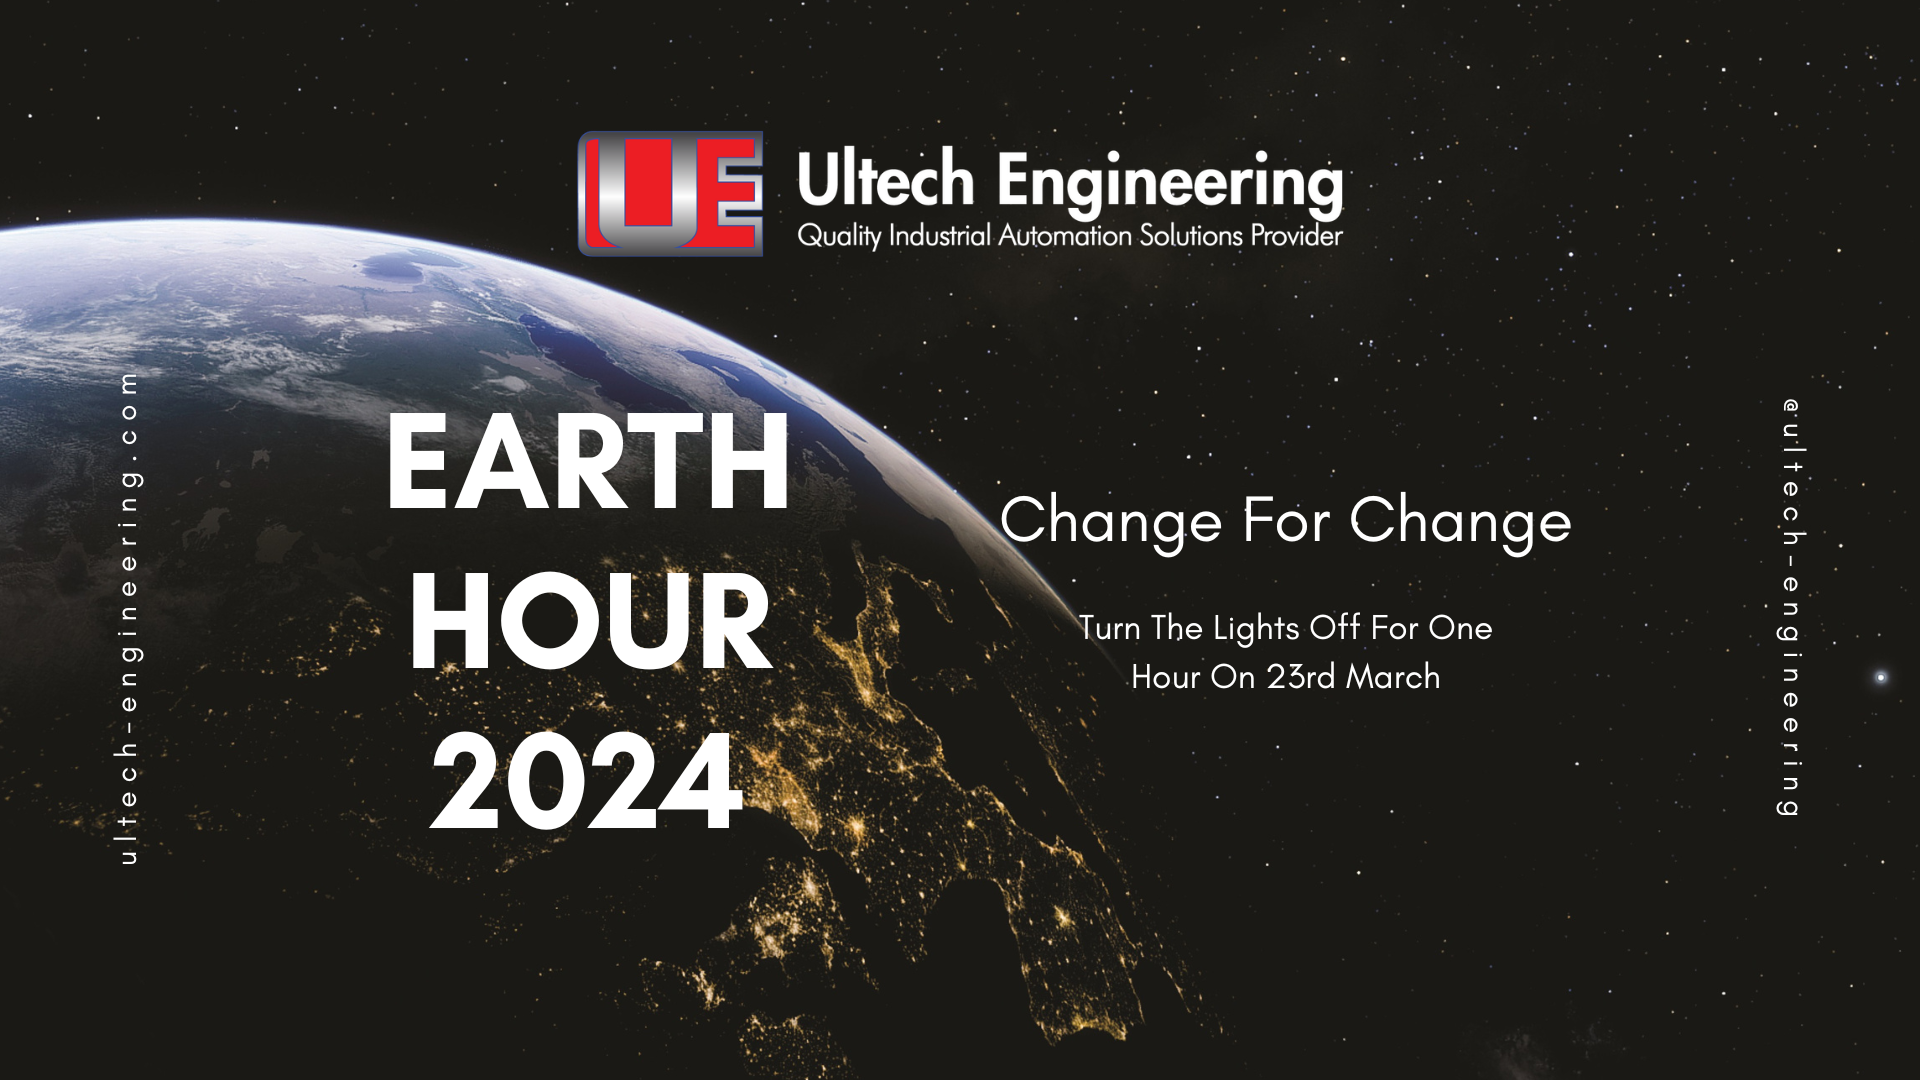 Shining a Light on Earth Hour 2024: Ultech Engineering's Commitment to Sustainable Energy